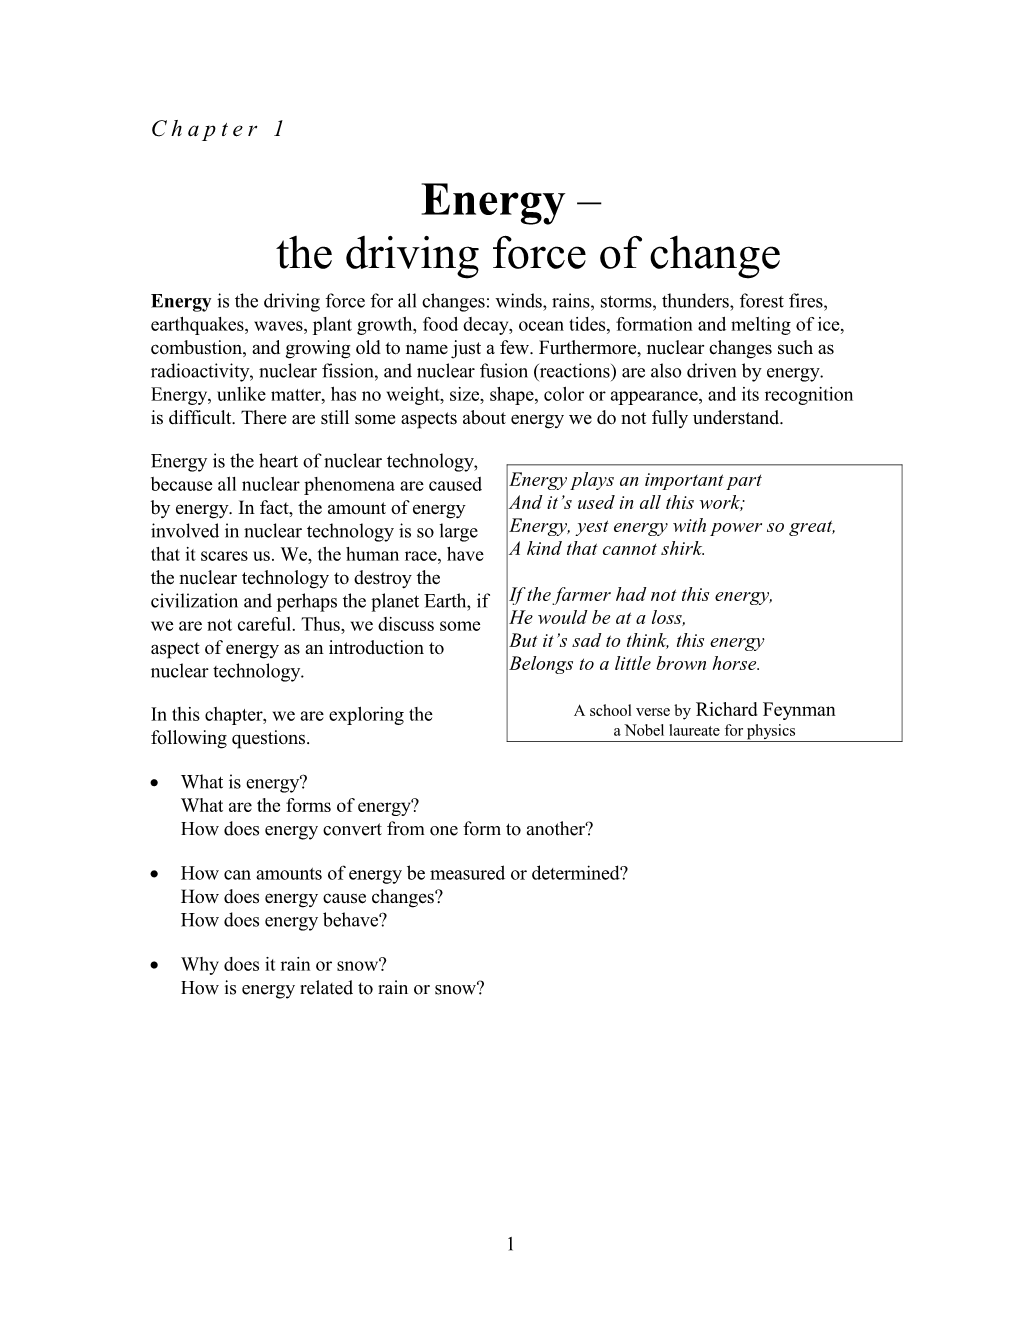 Energy the Driving Force of Change